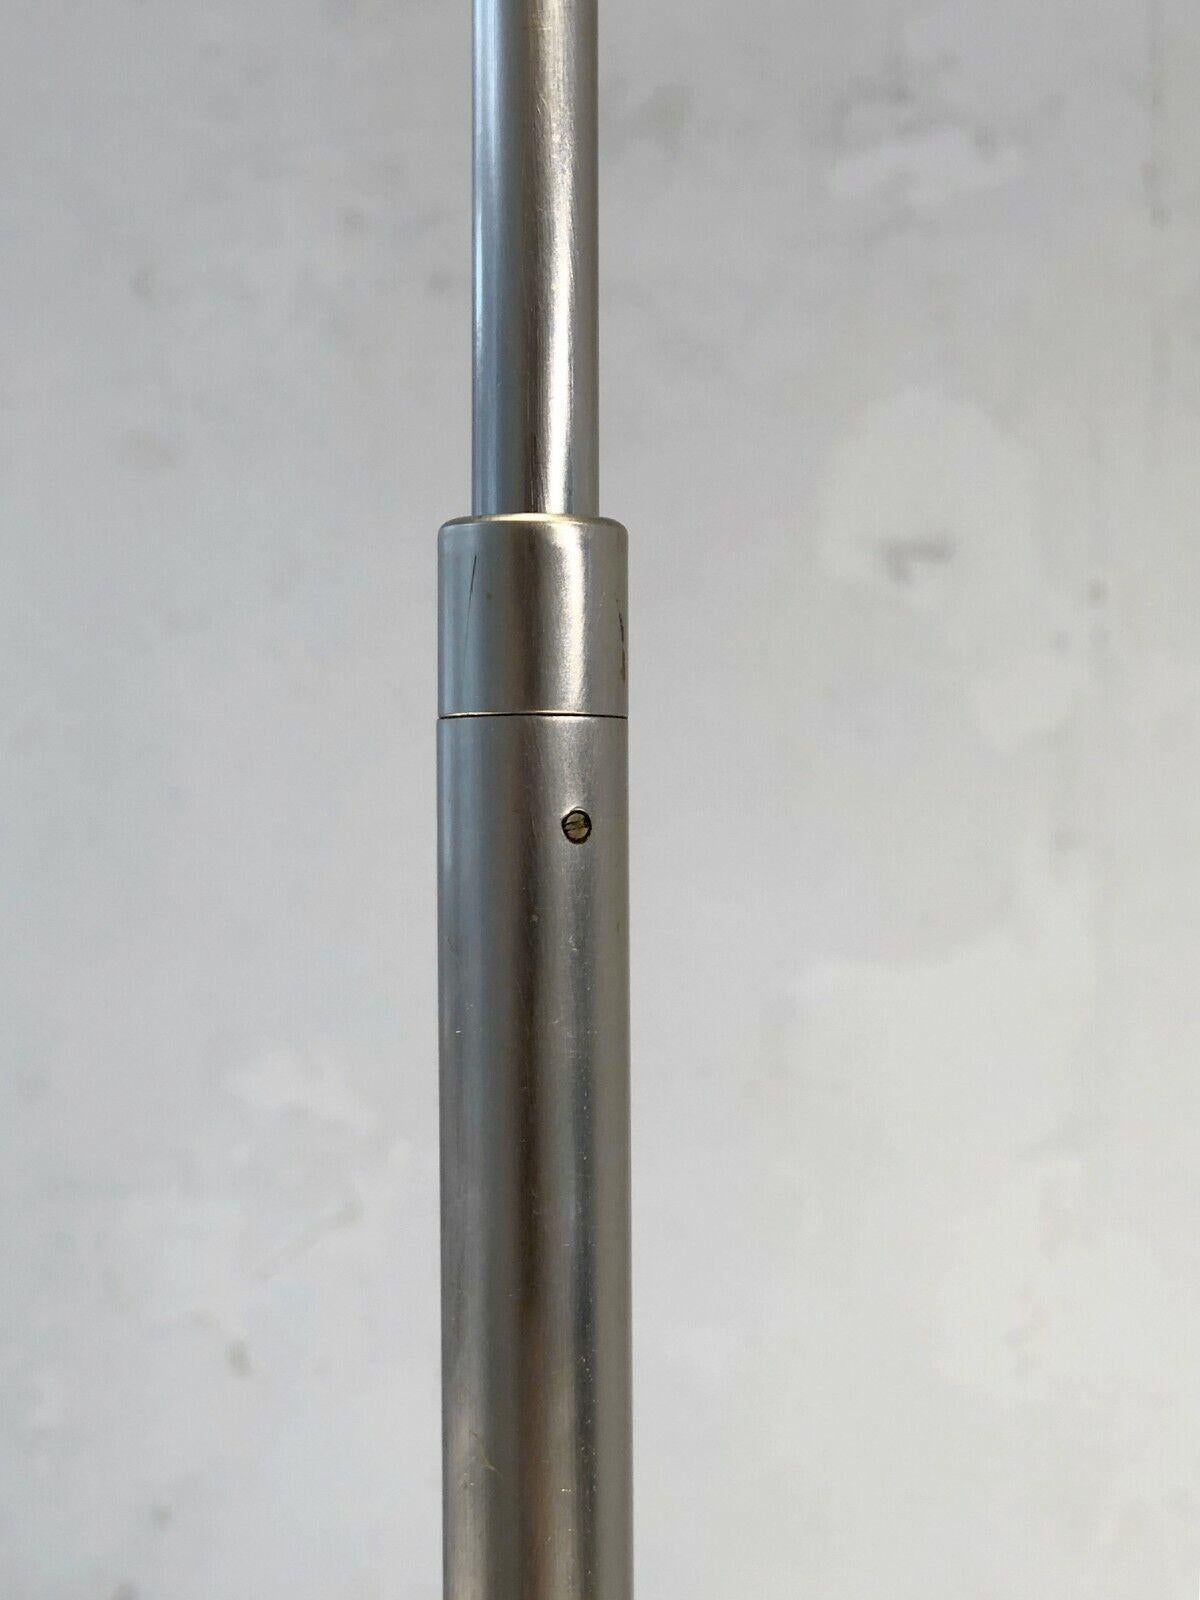 A MINIMAL MODERNIST Telescopic FLOOR LAMP by OSTUNI & FORTI, O-LUCE, Italy 1970 For Sale 1